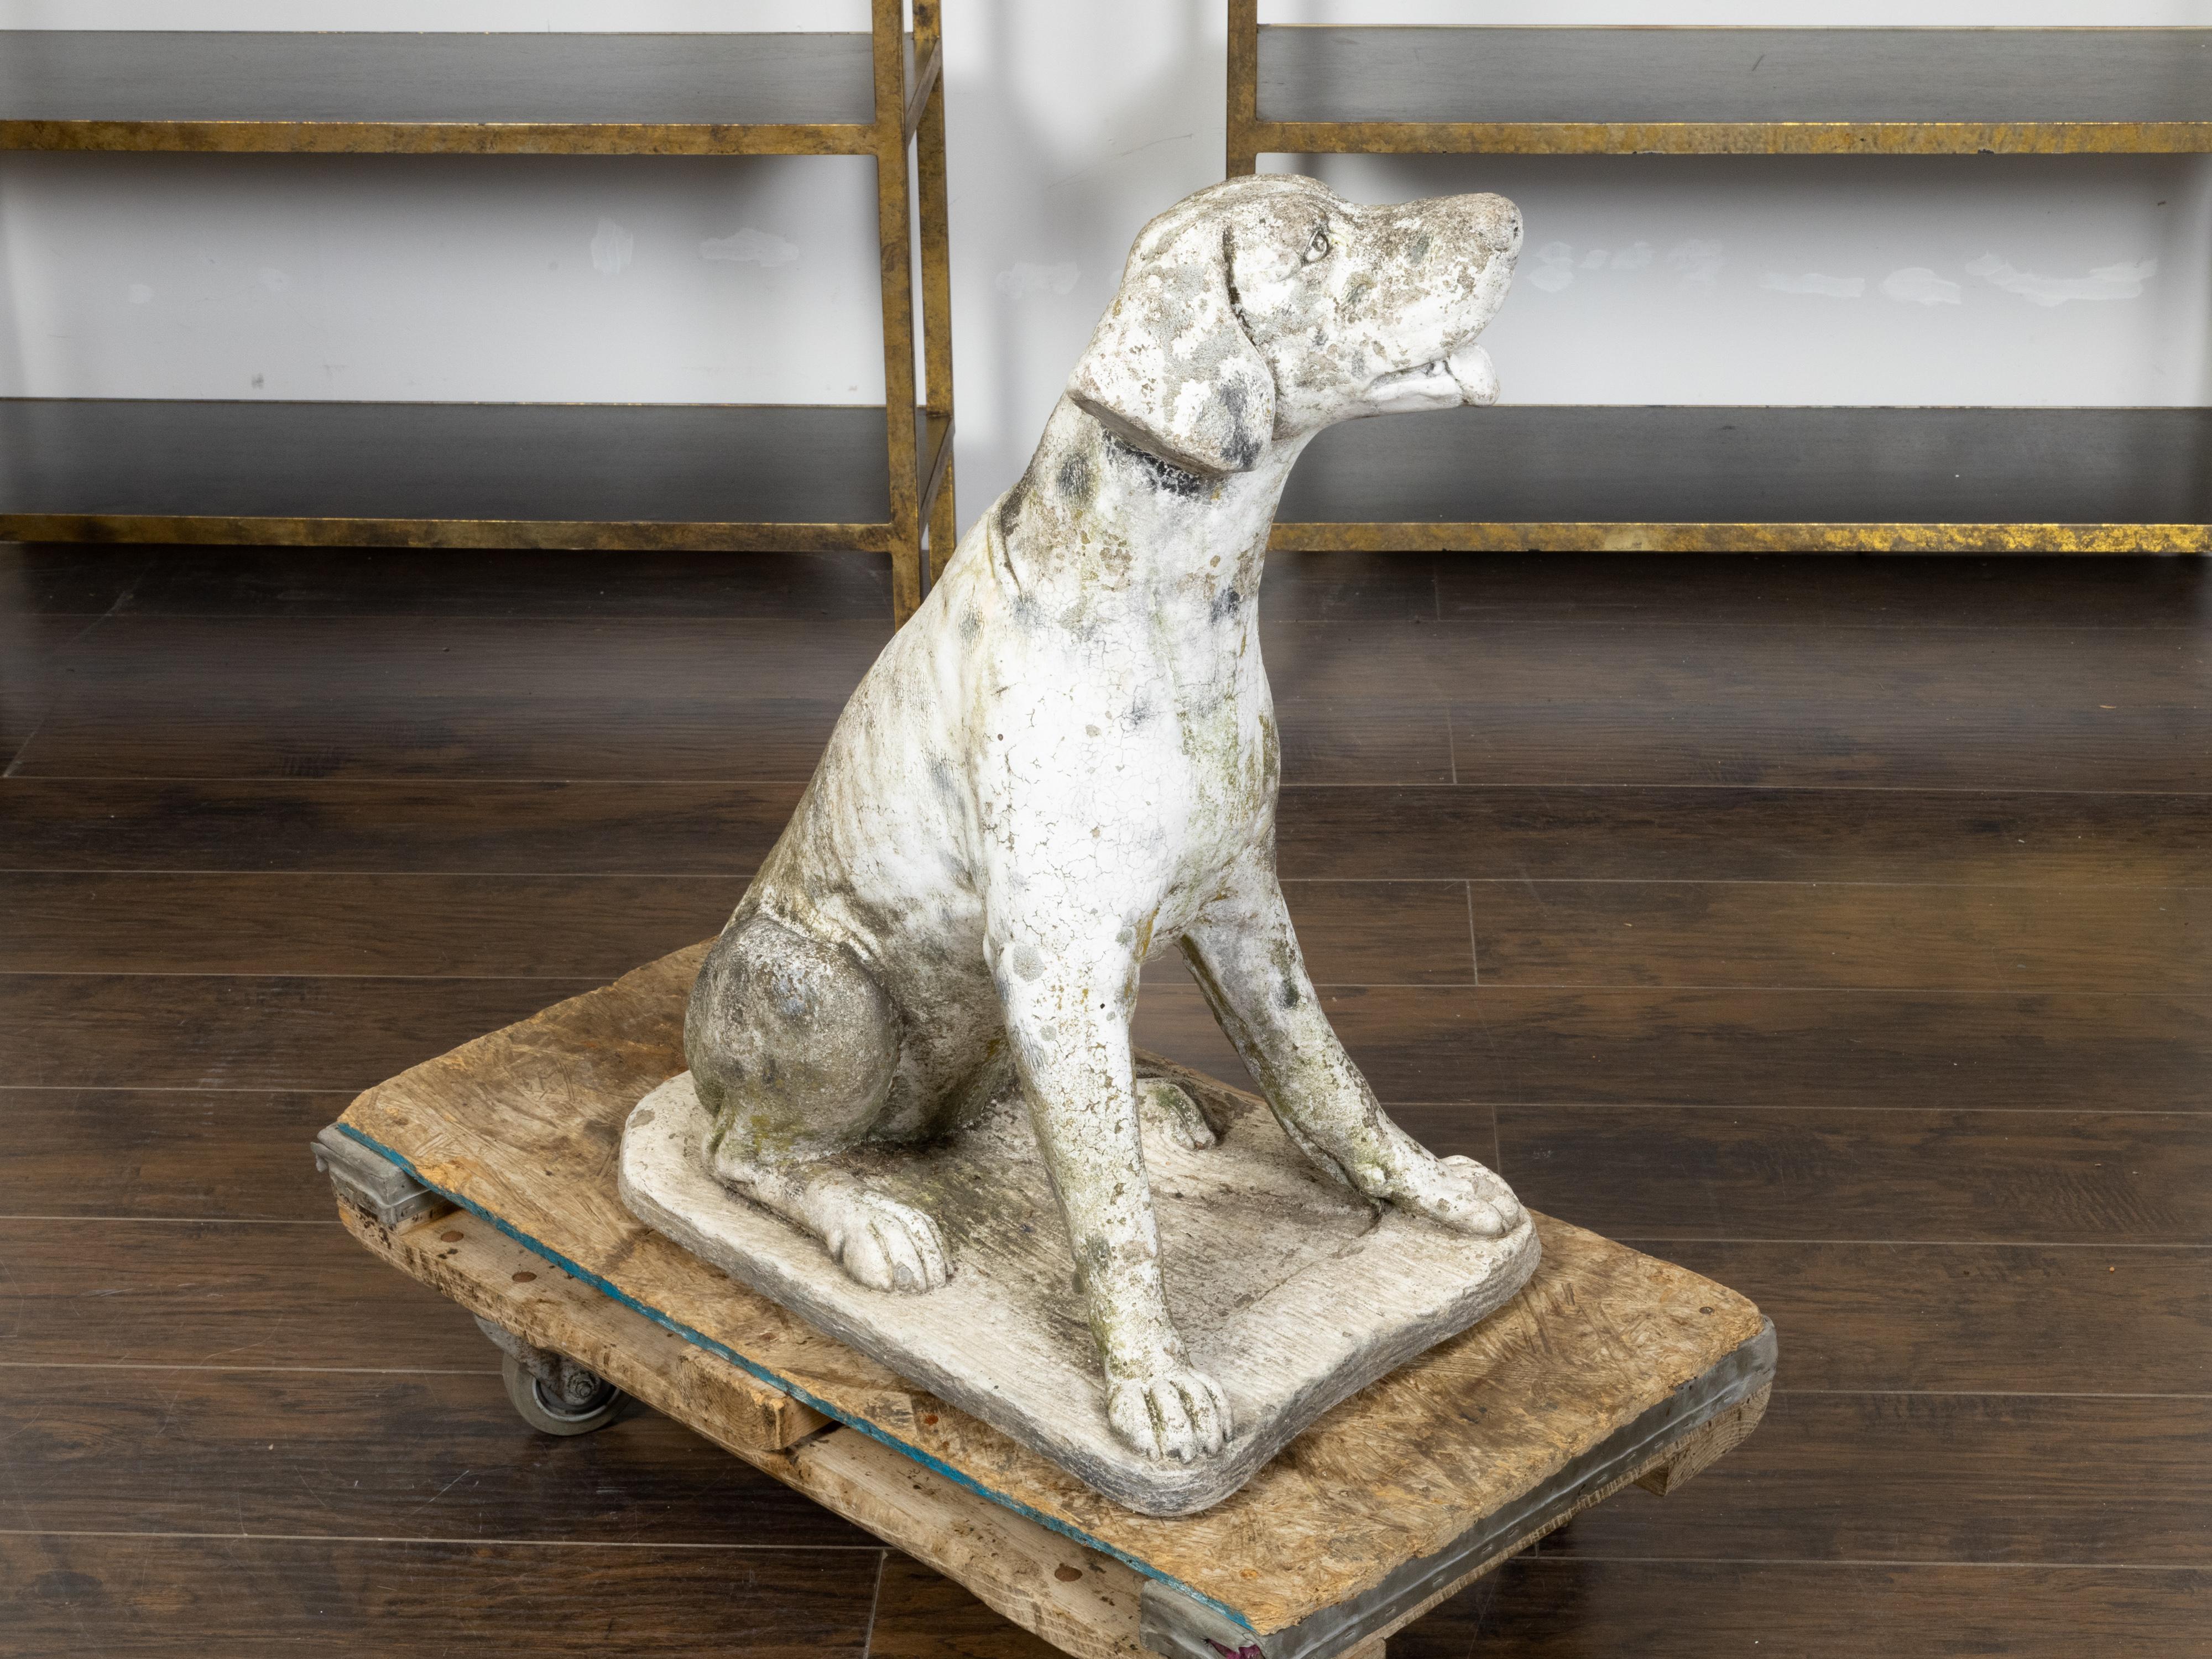 English 1920s Carved Stone Sculpture of a Dog Obediently Sitting on a Base 2